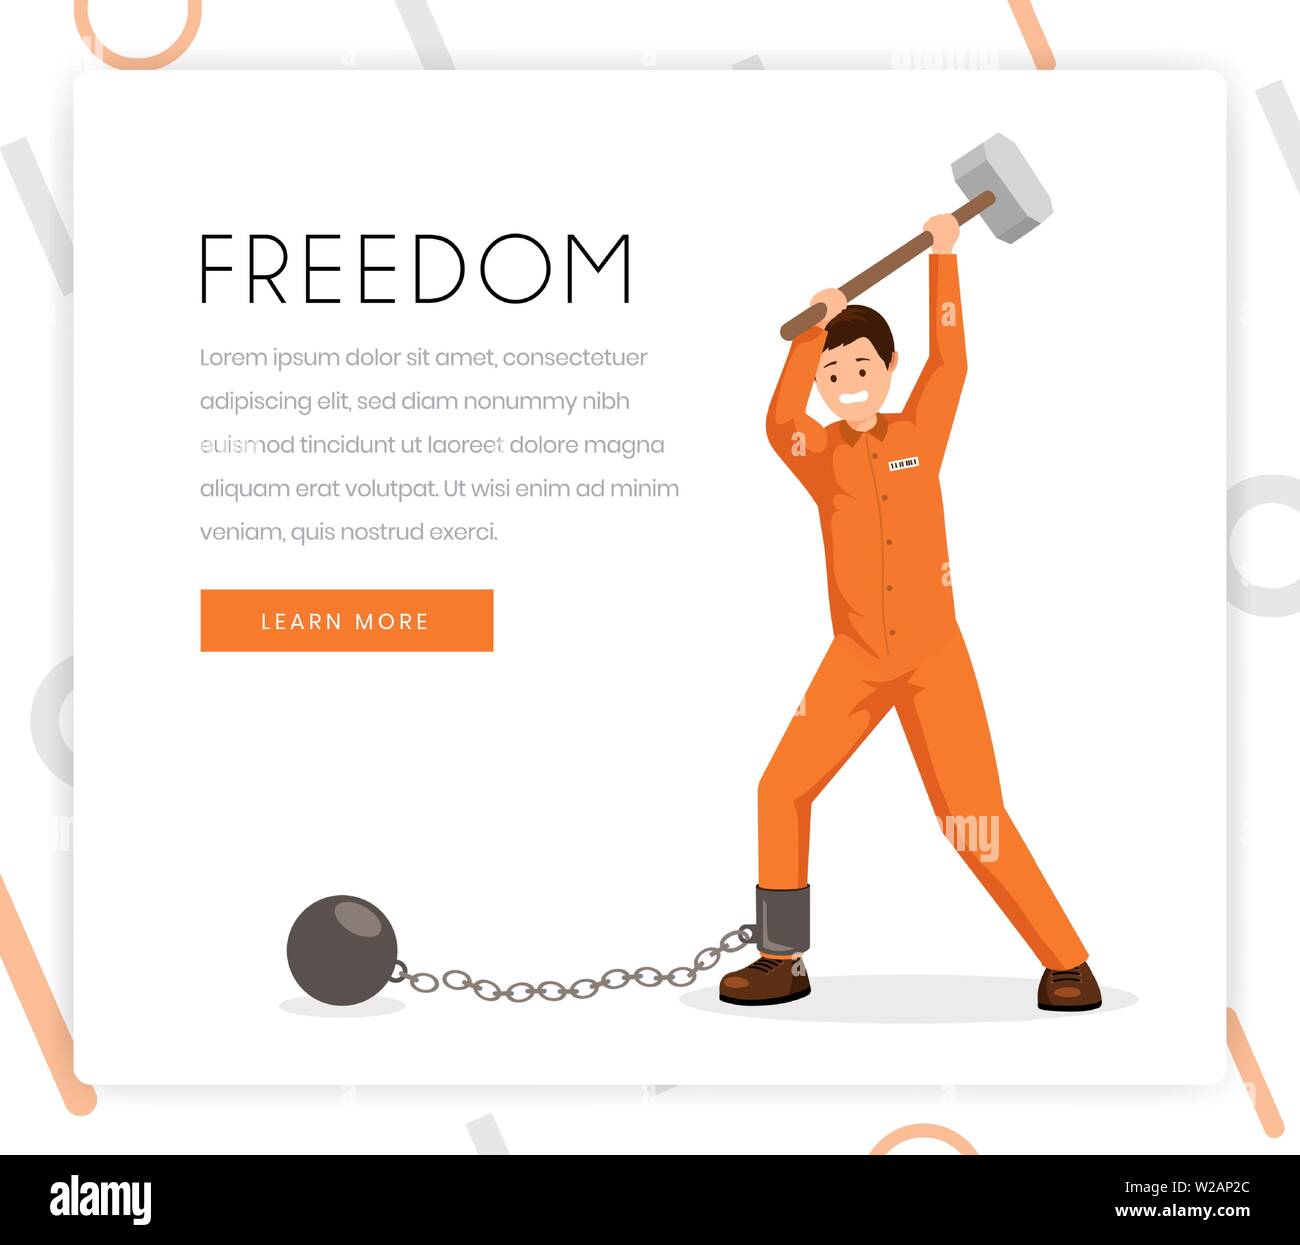 Fighting slavery vector landing page template. Prisoner, convict in uniform breaking shackles with sledge hammer. Human rights organization, freedom fighters foundation homepage design layout Stock Vector